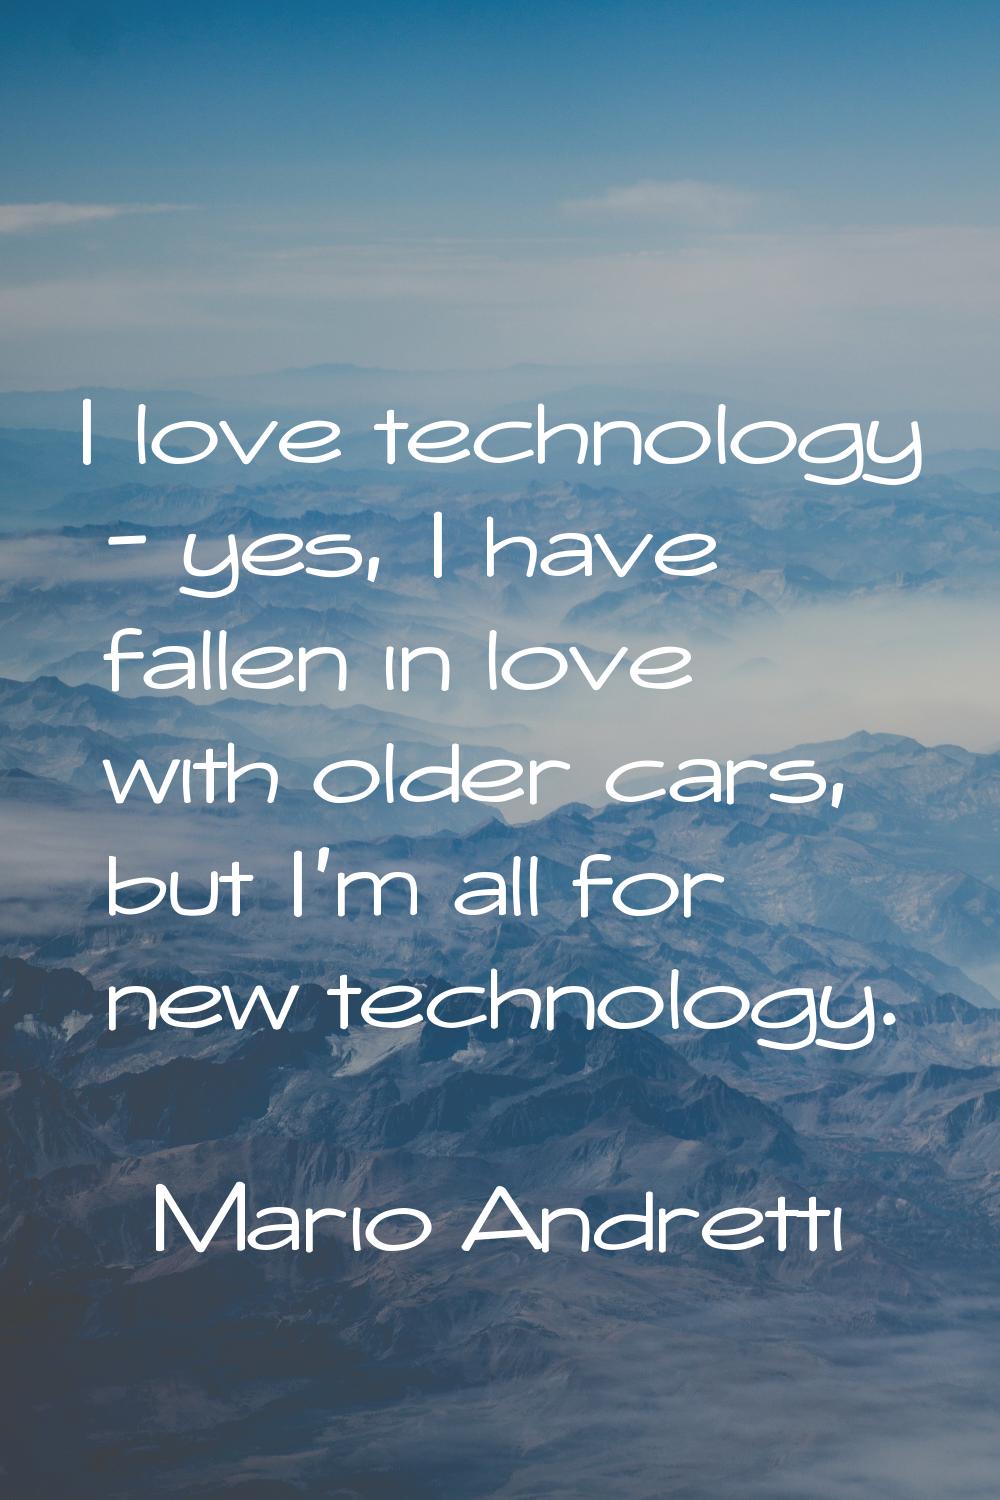 I love technology - yes, I have fallen in love with older cars, but I'm all for new technology.